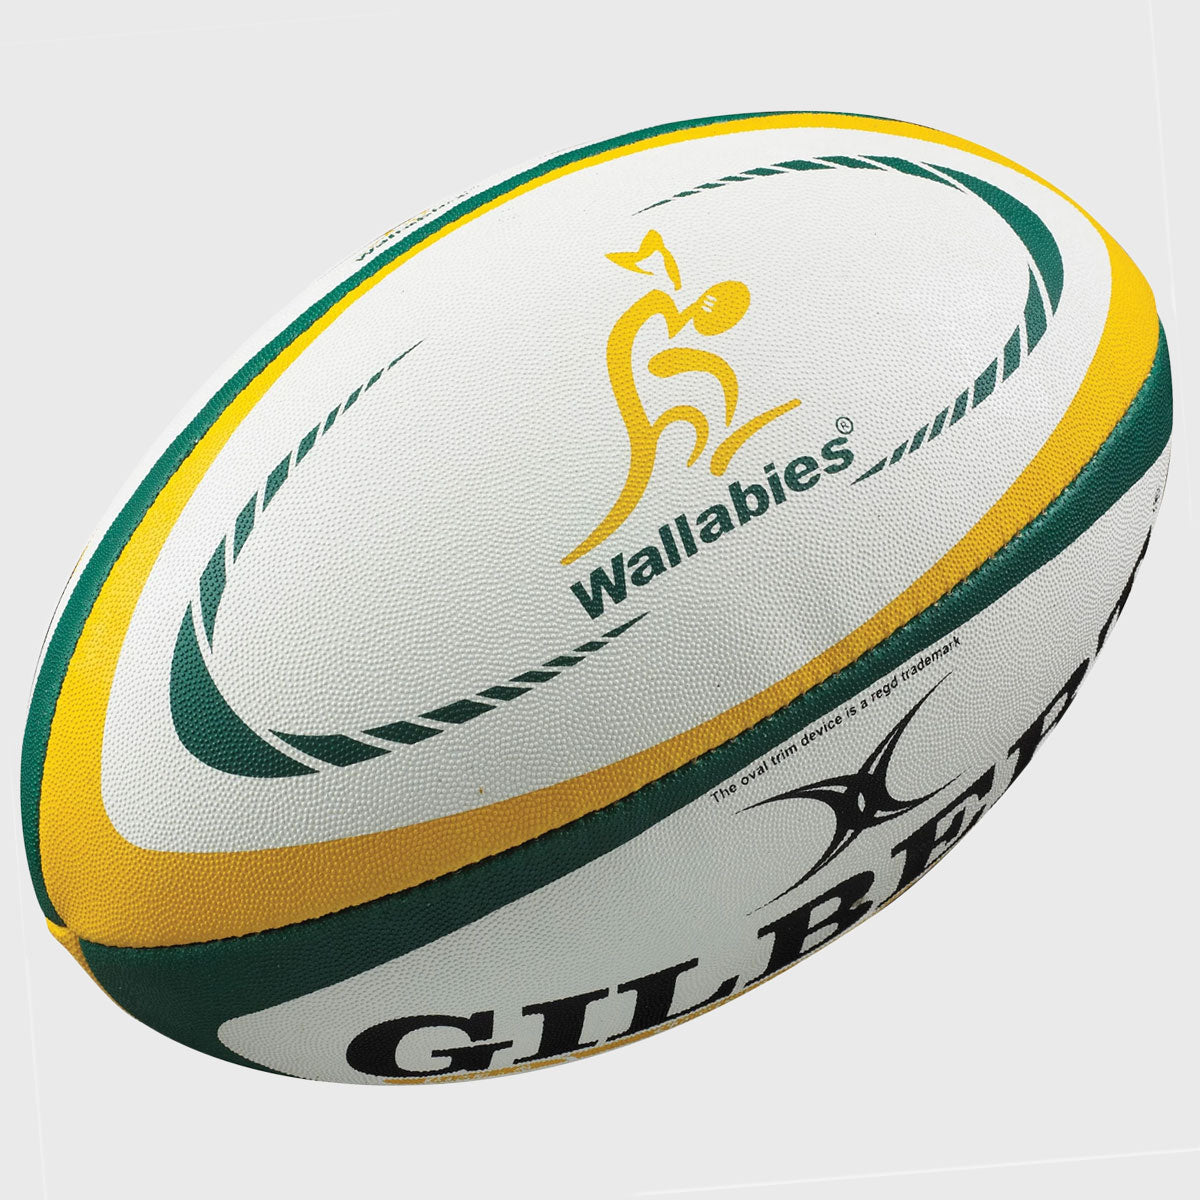 Buy Asics Wallabies Rugby Kit + | UK Delivery